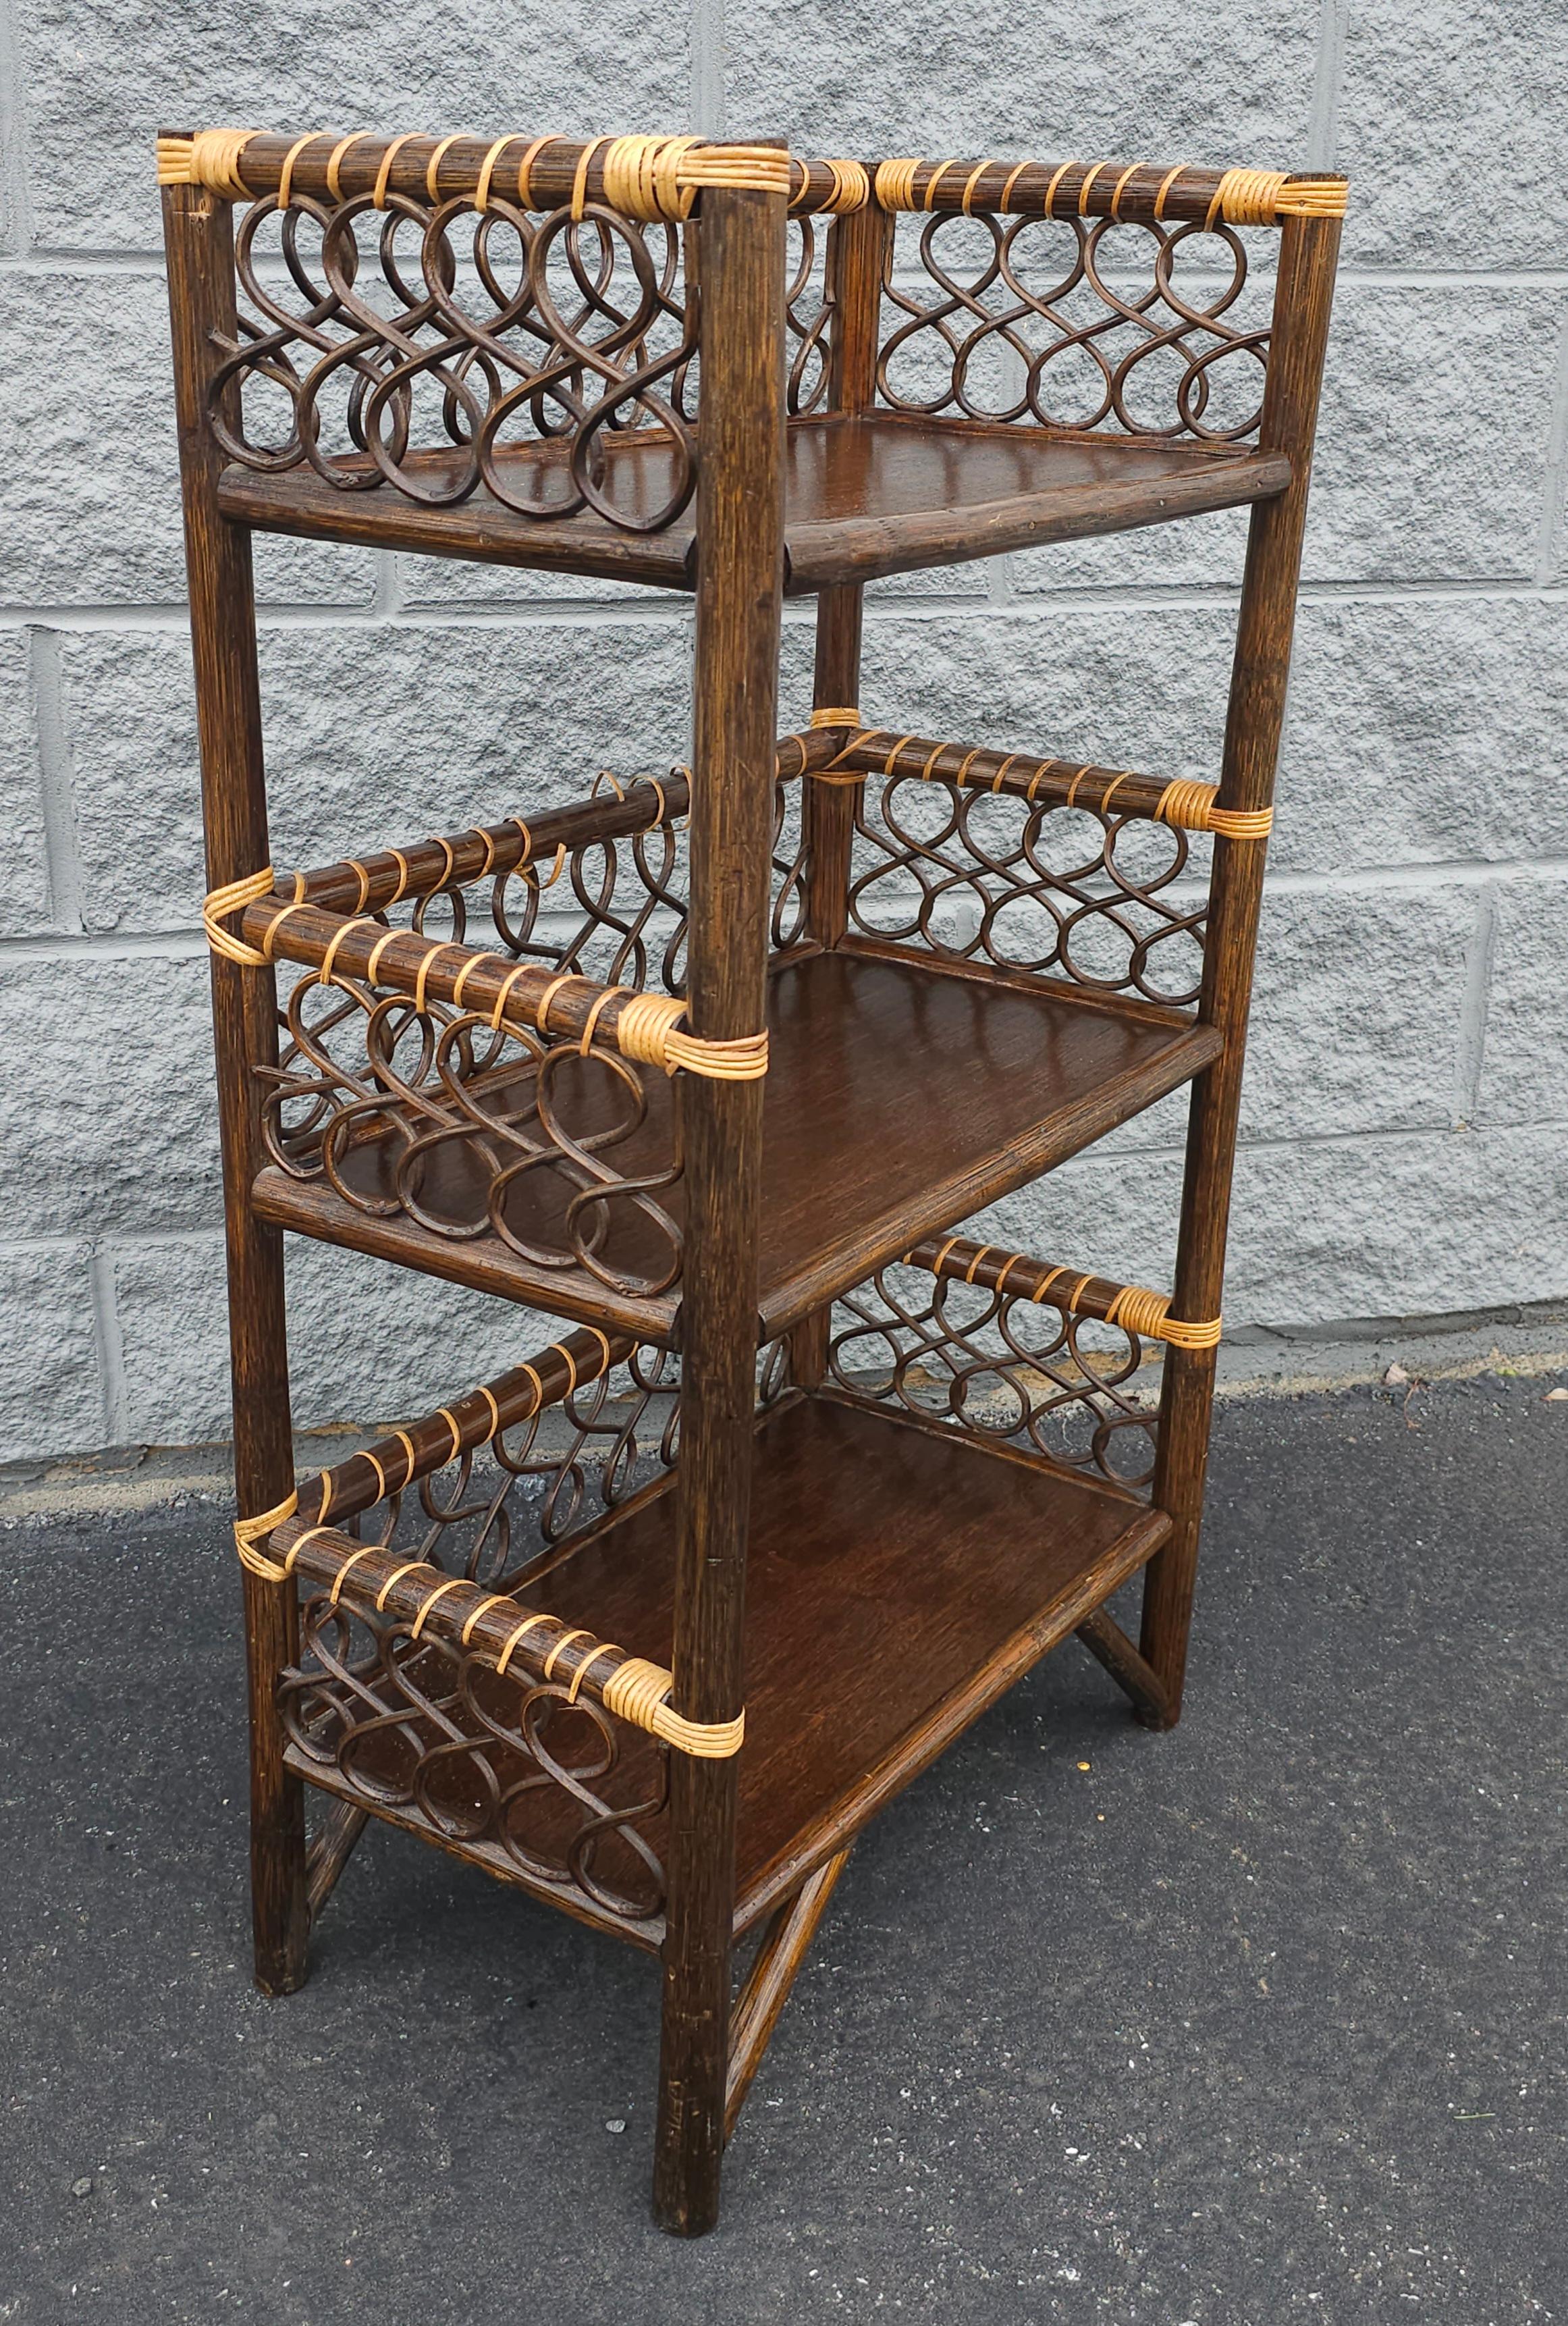 Vintage Handcrafted Walnut Finish Rattan Petite Bookcase Etagere In Good Condition For Sale In Germantown, MD